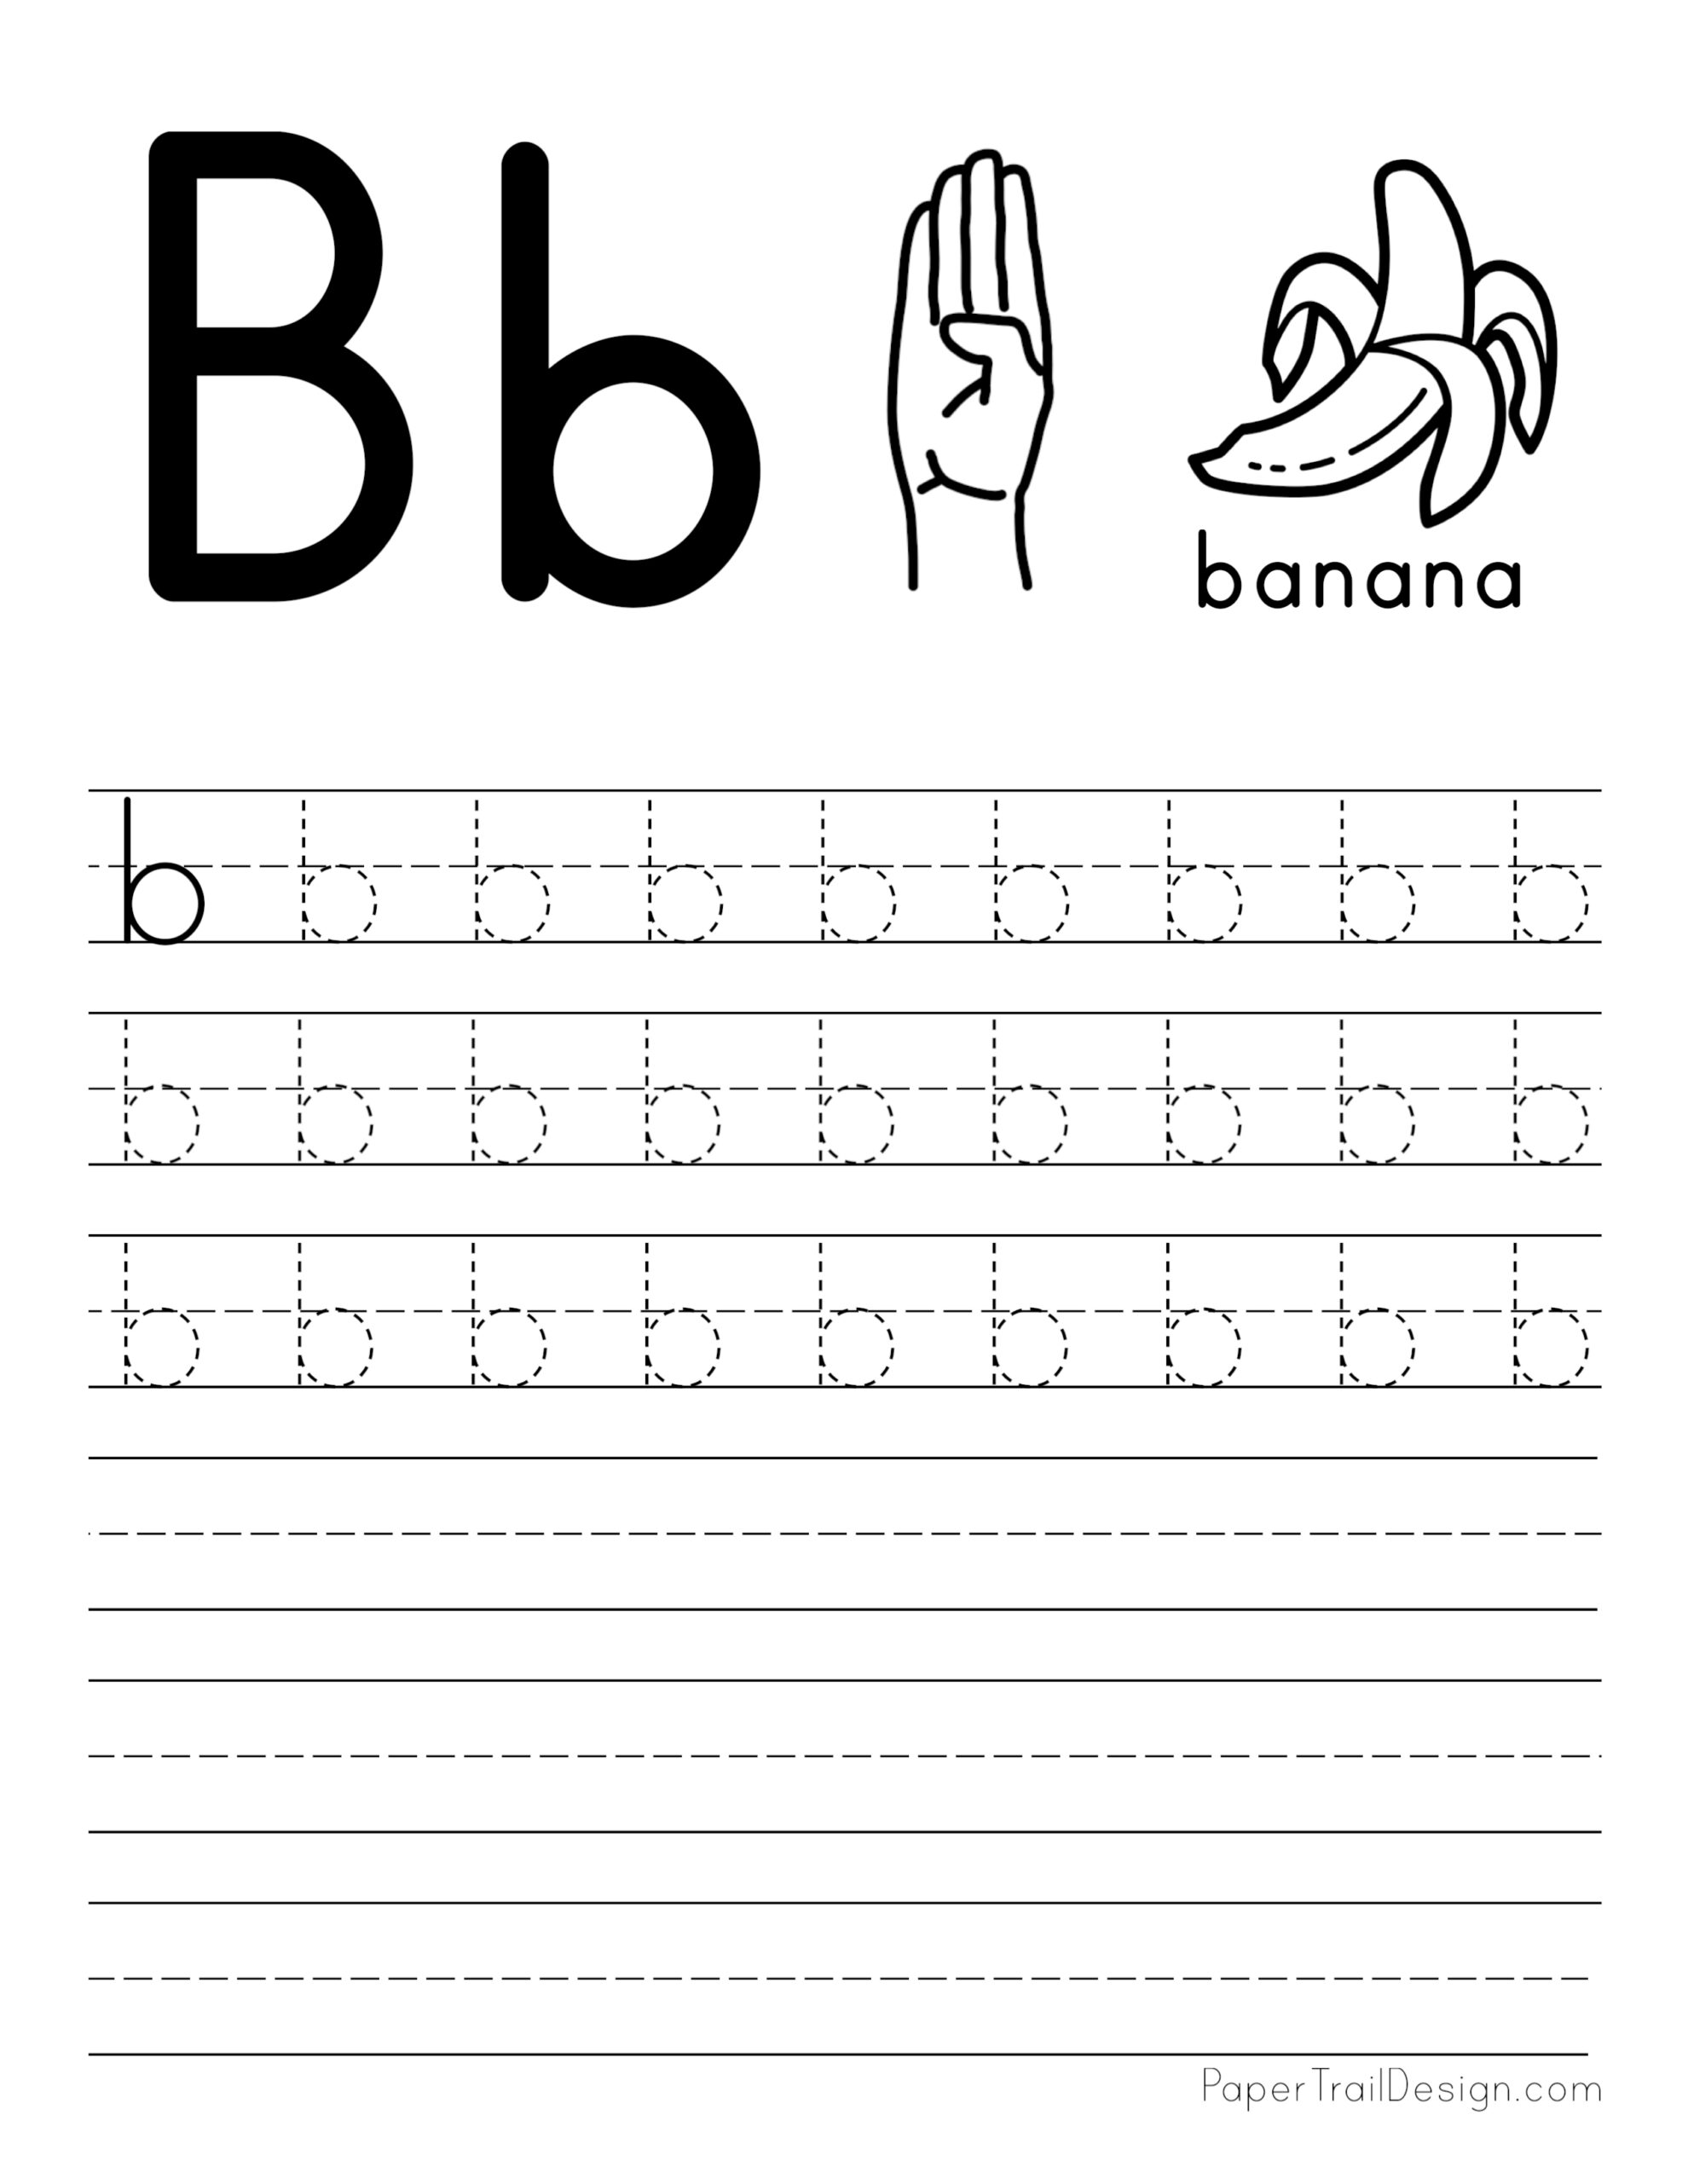 abcs-dashed-letters-alphabet-writing-practice-worksheet-student-handouts-free-printable